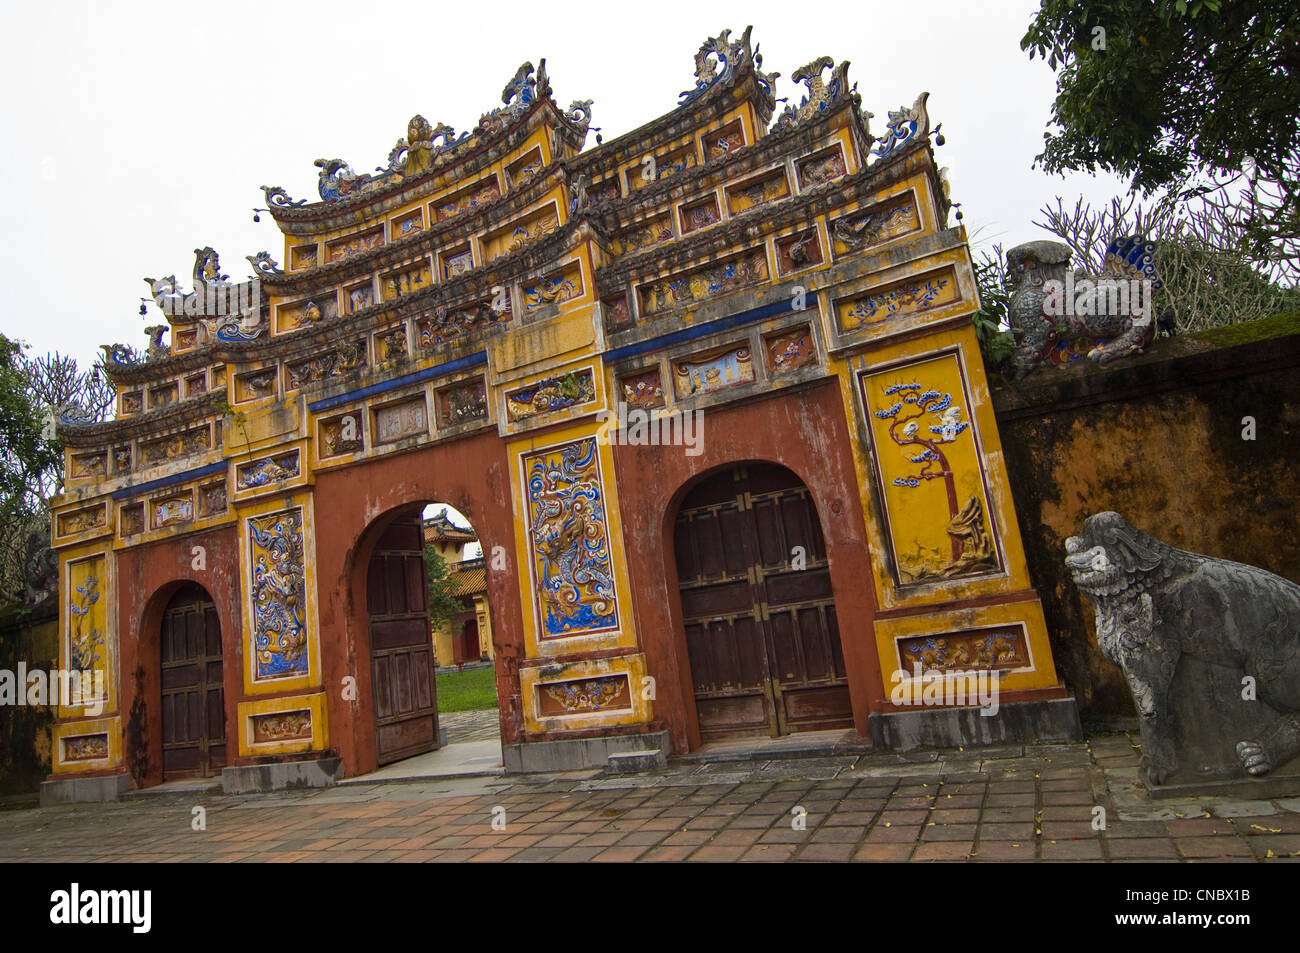 Horizontal view of Hien Lam Cac Pavilion, [Pavilion of Lasting Lucidity] an ornate gateway in the Imperial Citadel in Hue, Vietnam Stock Photo